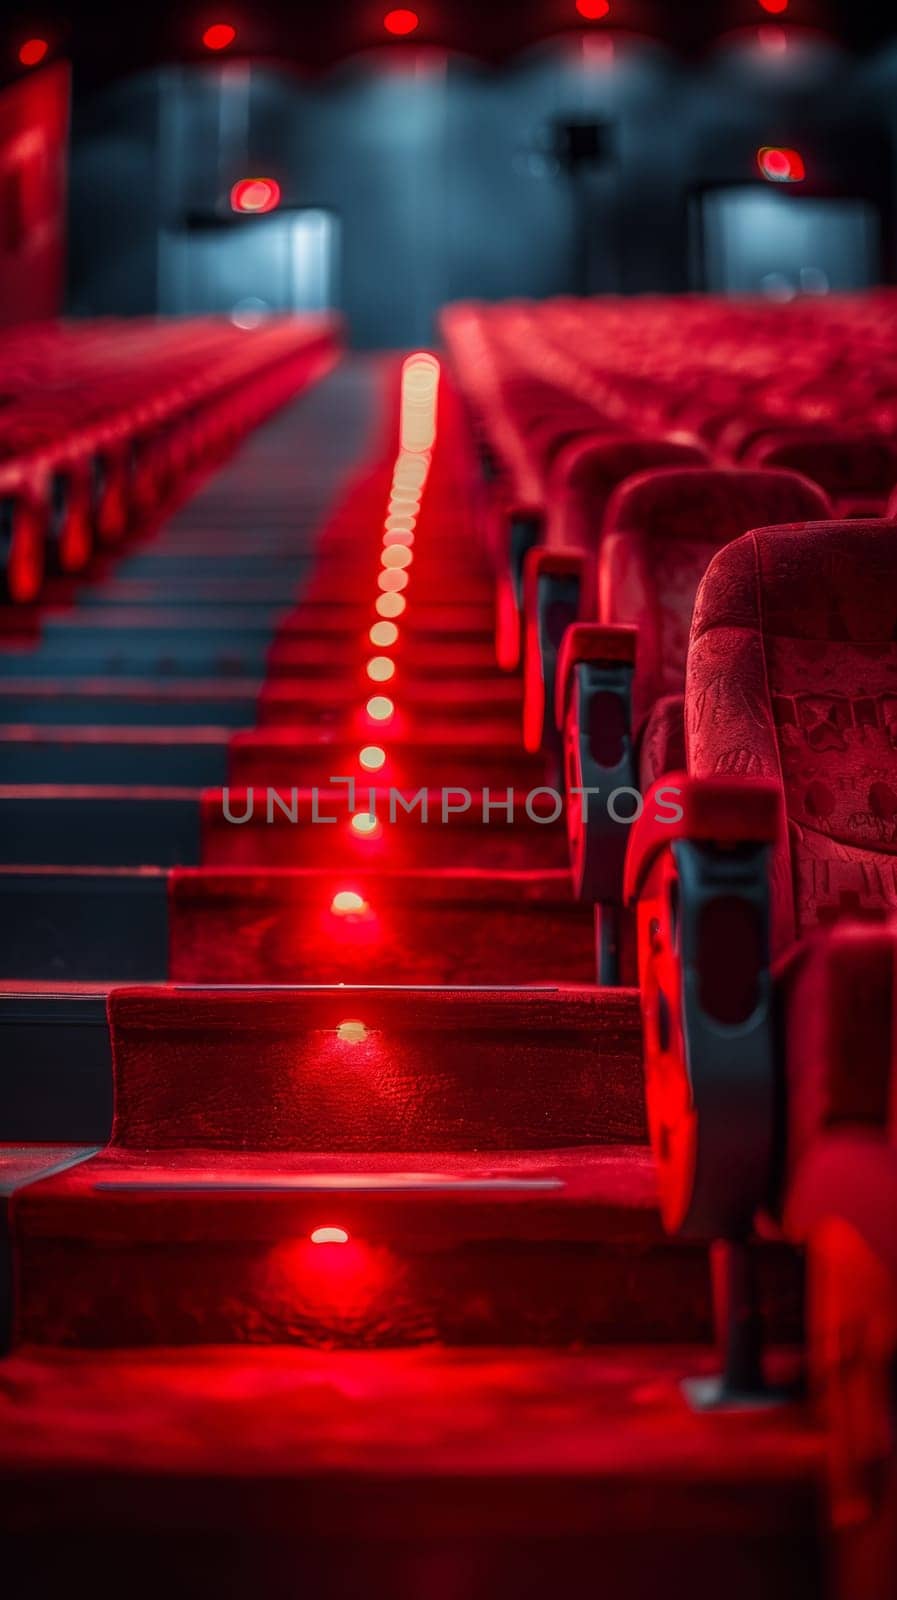 A row of red lights on a wall next to some seats